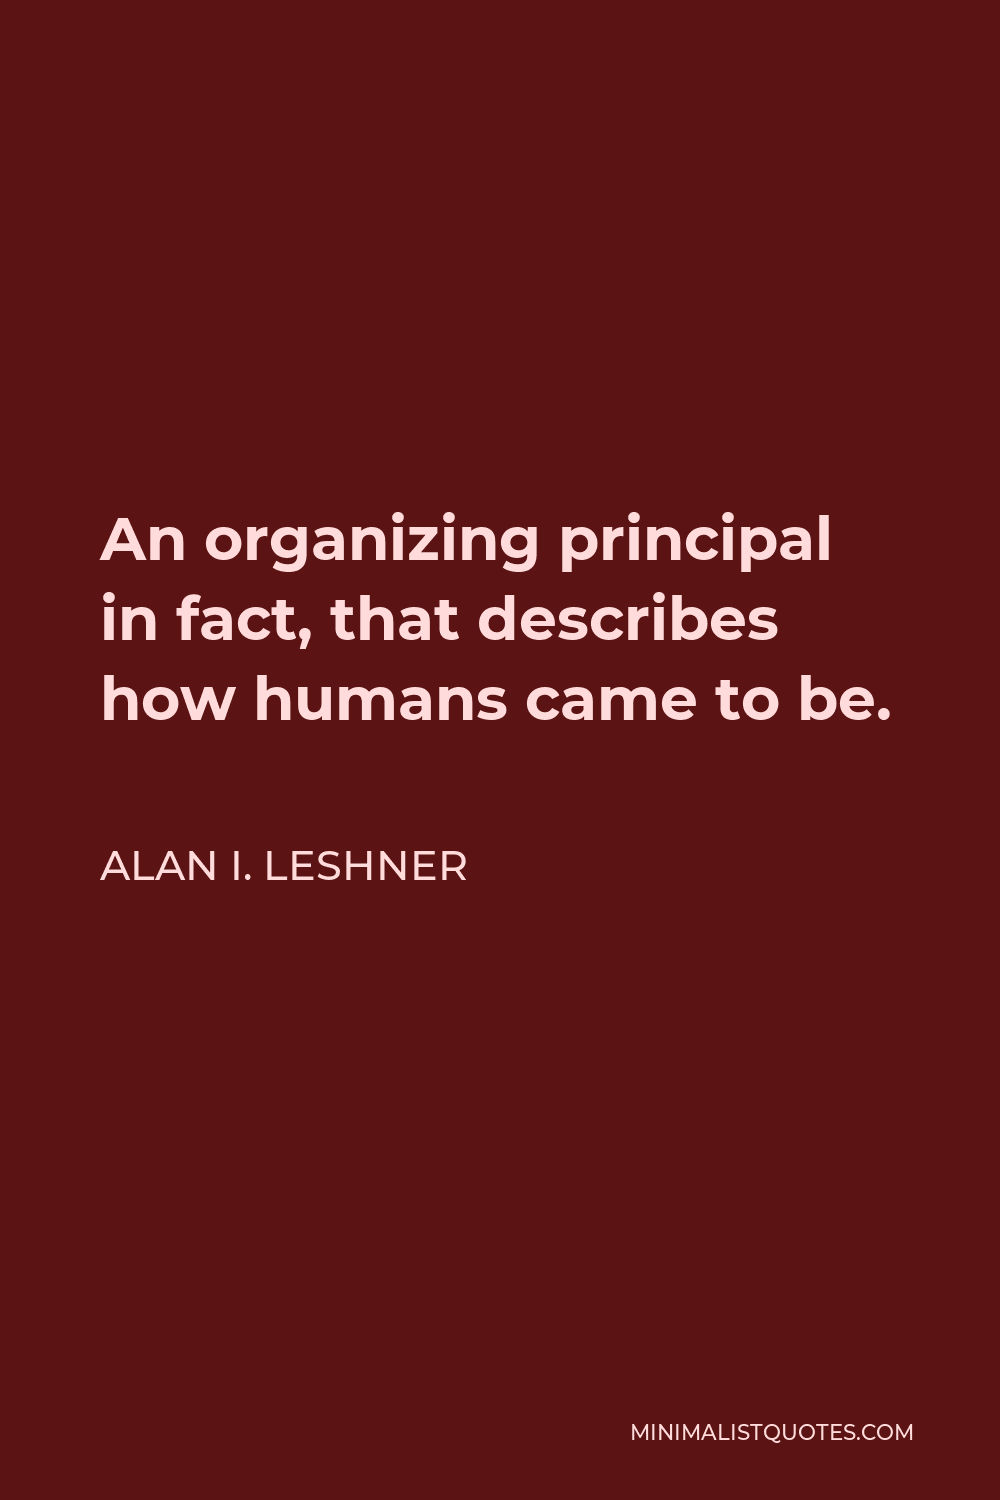 Alan I. Leshner Quote - An organizing principal in fact, that describes how humans came to be.